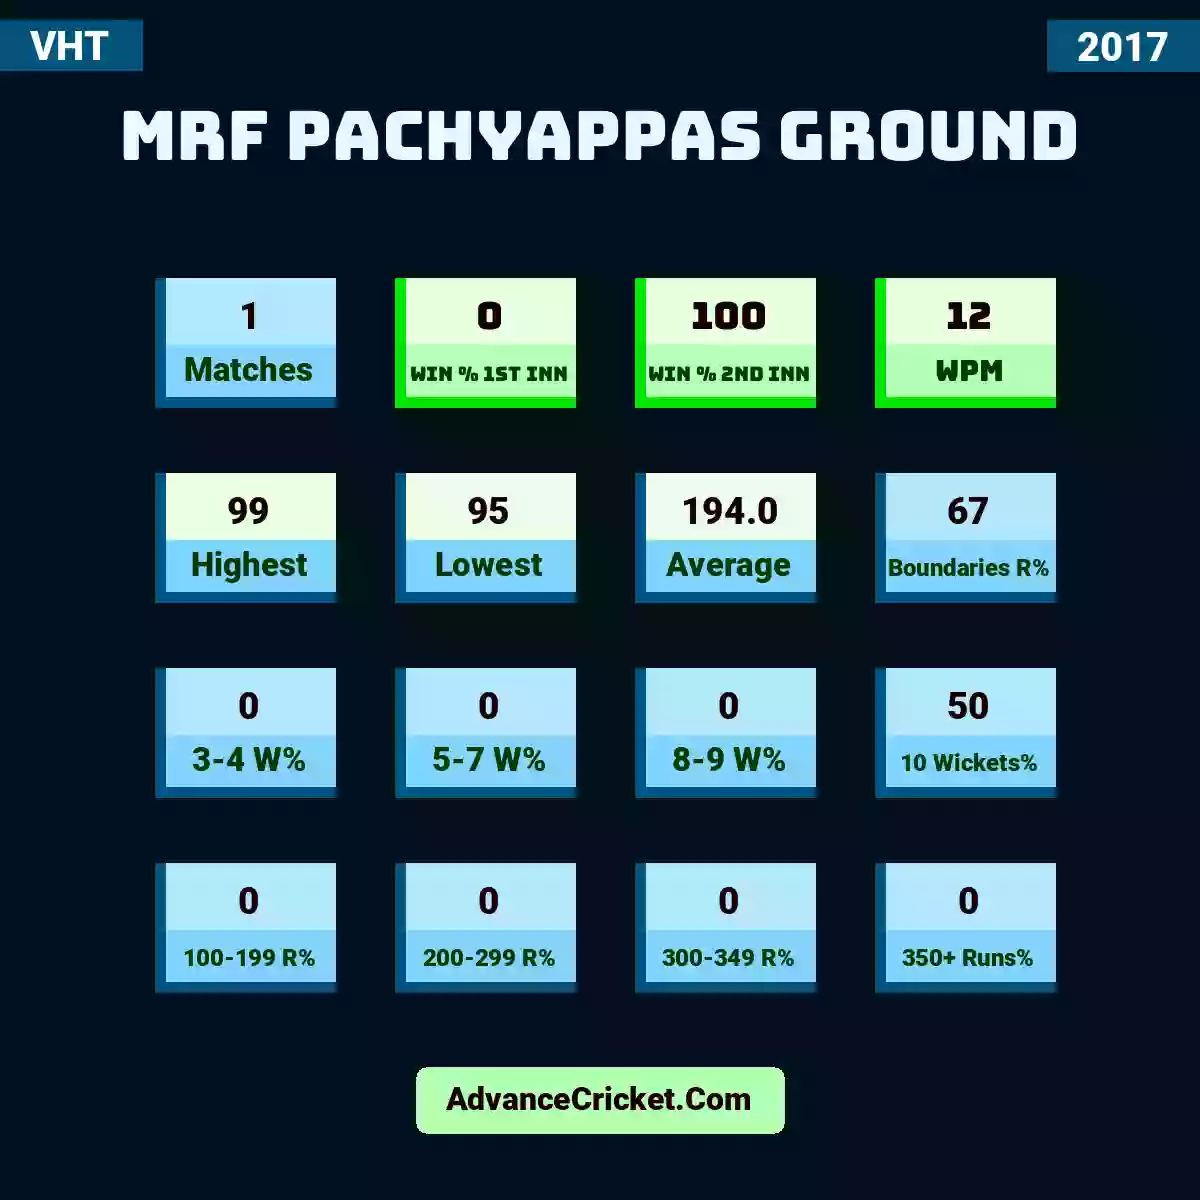 Image showing MRF Pachyappas Ground with Matches: 1, Win % 1st Inn: 0, Win % 2nd Inn: 100, WPM: 12, Highest: 99, Lowest: 95, Average: 194.0, Boundaries R%: 67, 3-4 W%: 0, 5-7 W%: 0, 8-9 W%: 0, 10 Wickets%: 50, 100-199 R%: 0, 200-299 R%: 0, 300-349 R%: 0, 350+ Runs%: 0.